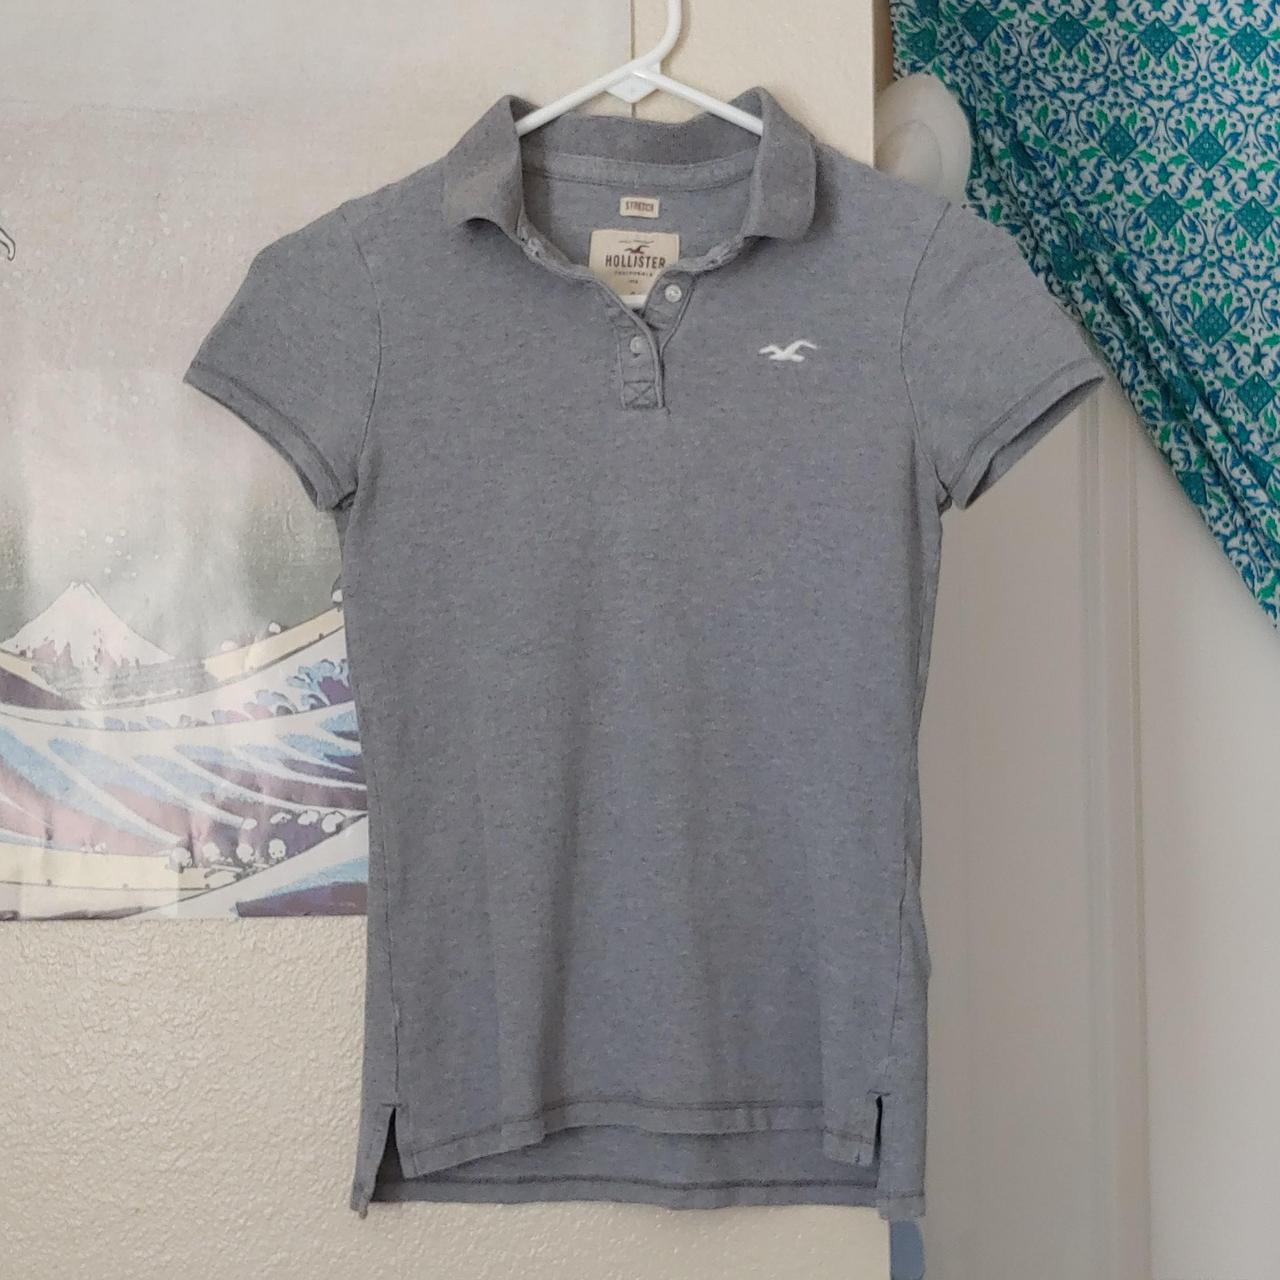 Hollister Co. Women's Grey and Silver Polo-shirts | Depop